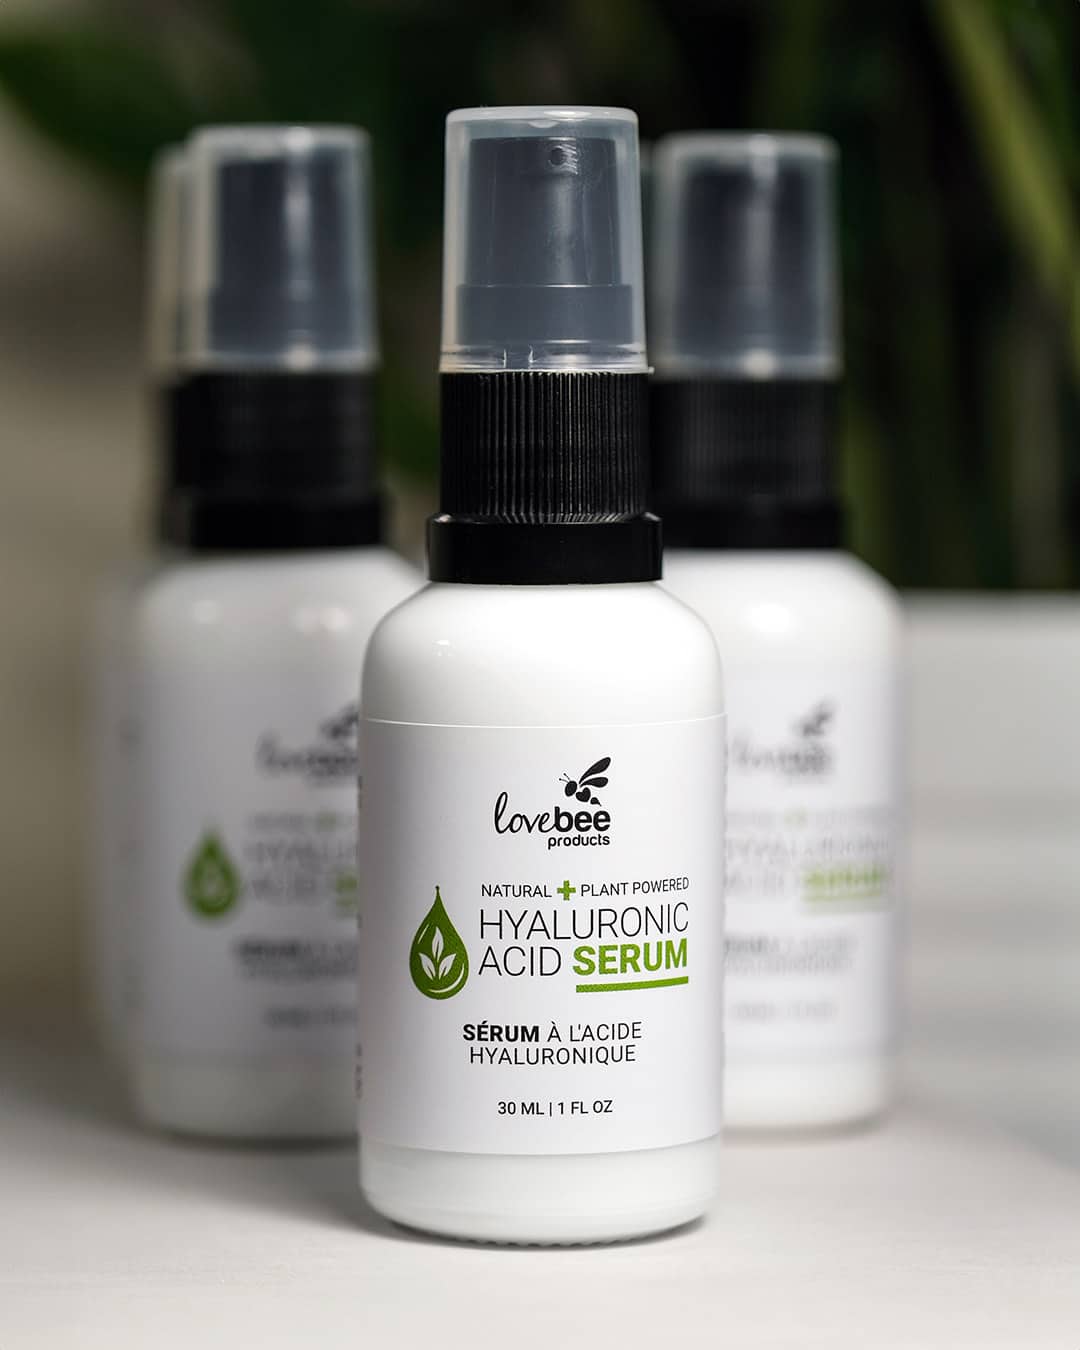 A bottle of Hyaluronic Acid Serum from Lovebee Products